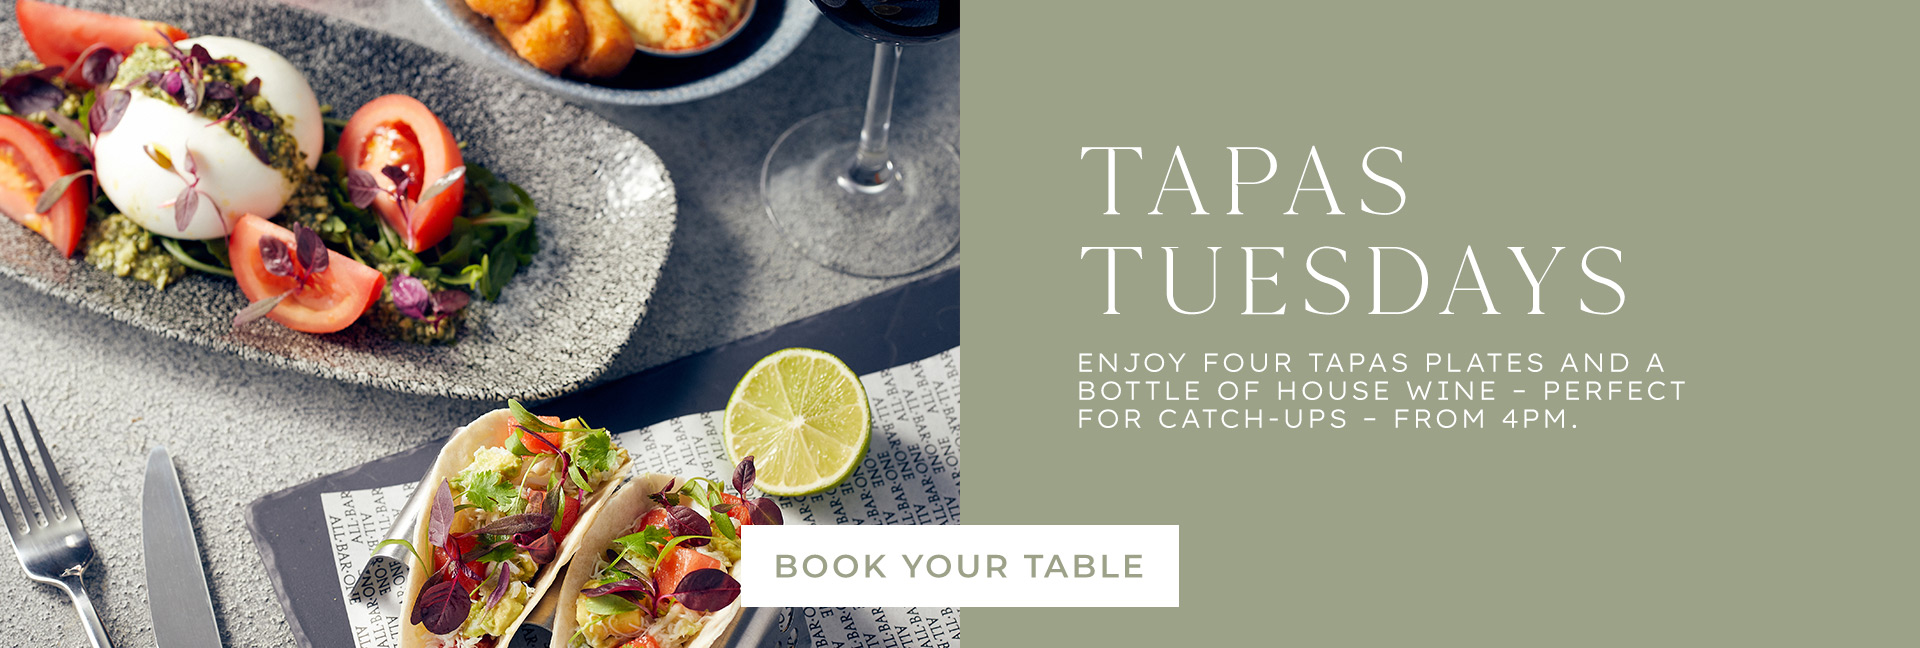 Tapas Tuesday at All Bar One Harrogate - Book now